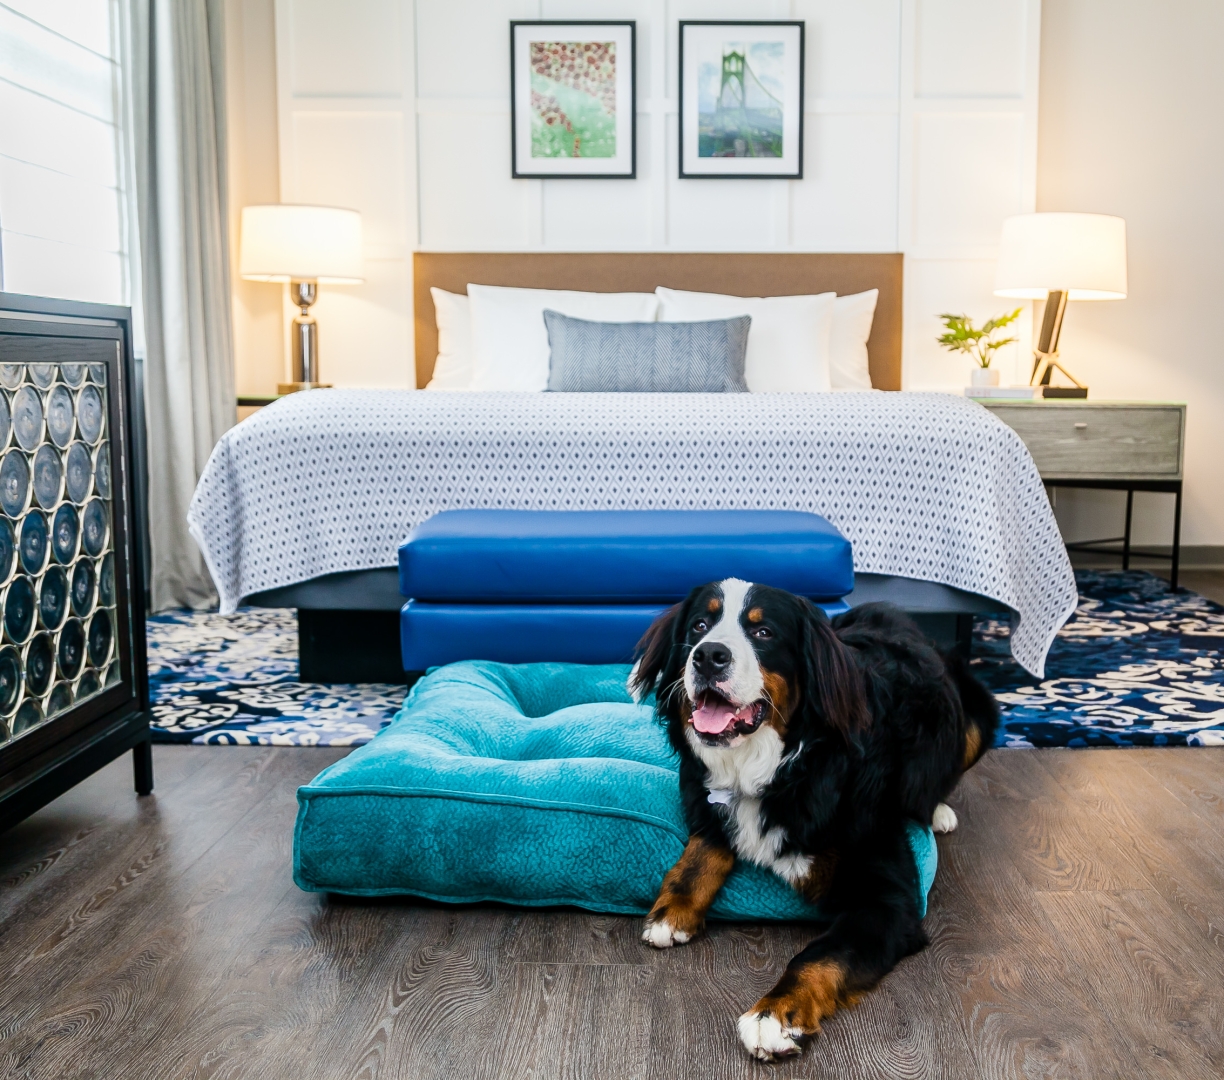 A bernese mountain dog on a pet bed in a suite at the Heathman Hotel in Portland.